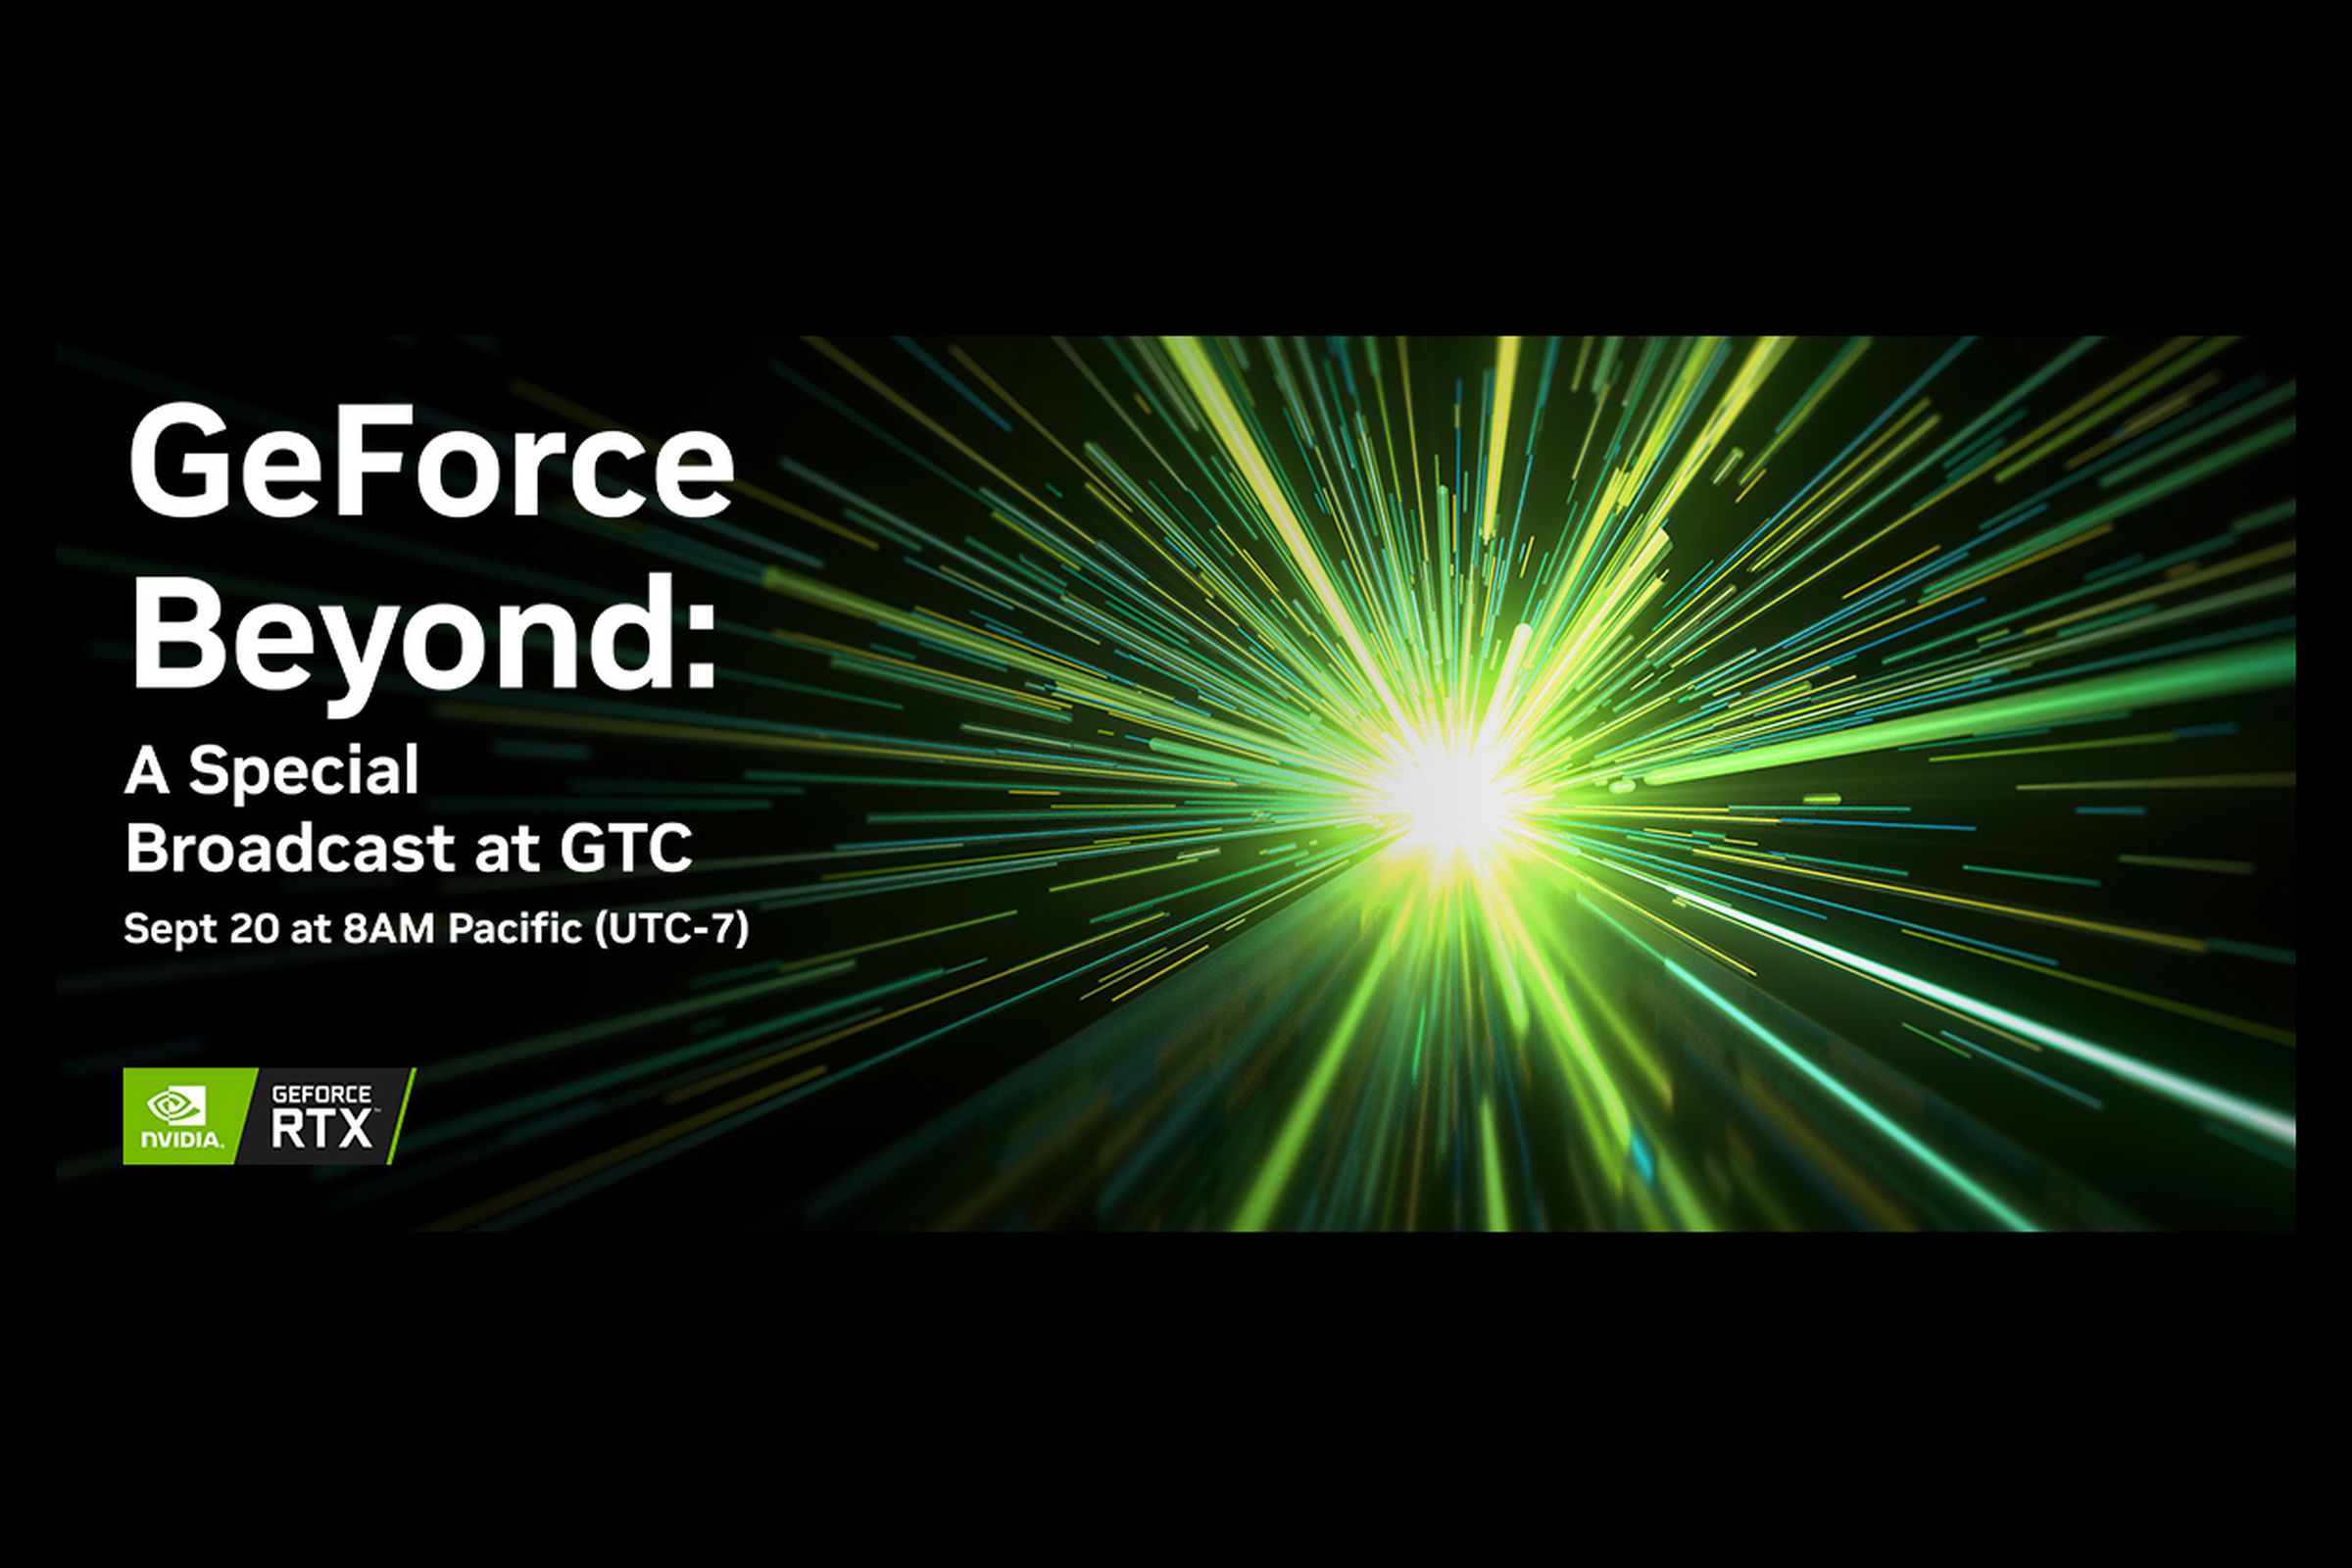 Nvidia’s GeForce Beyond event takes place on September 20th